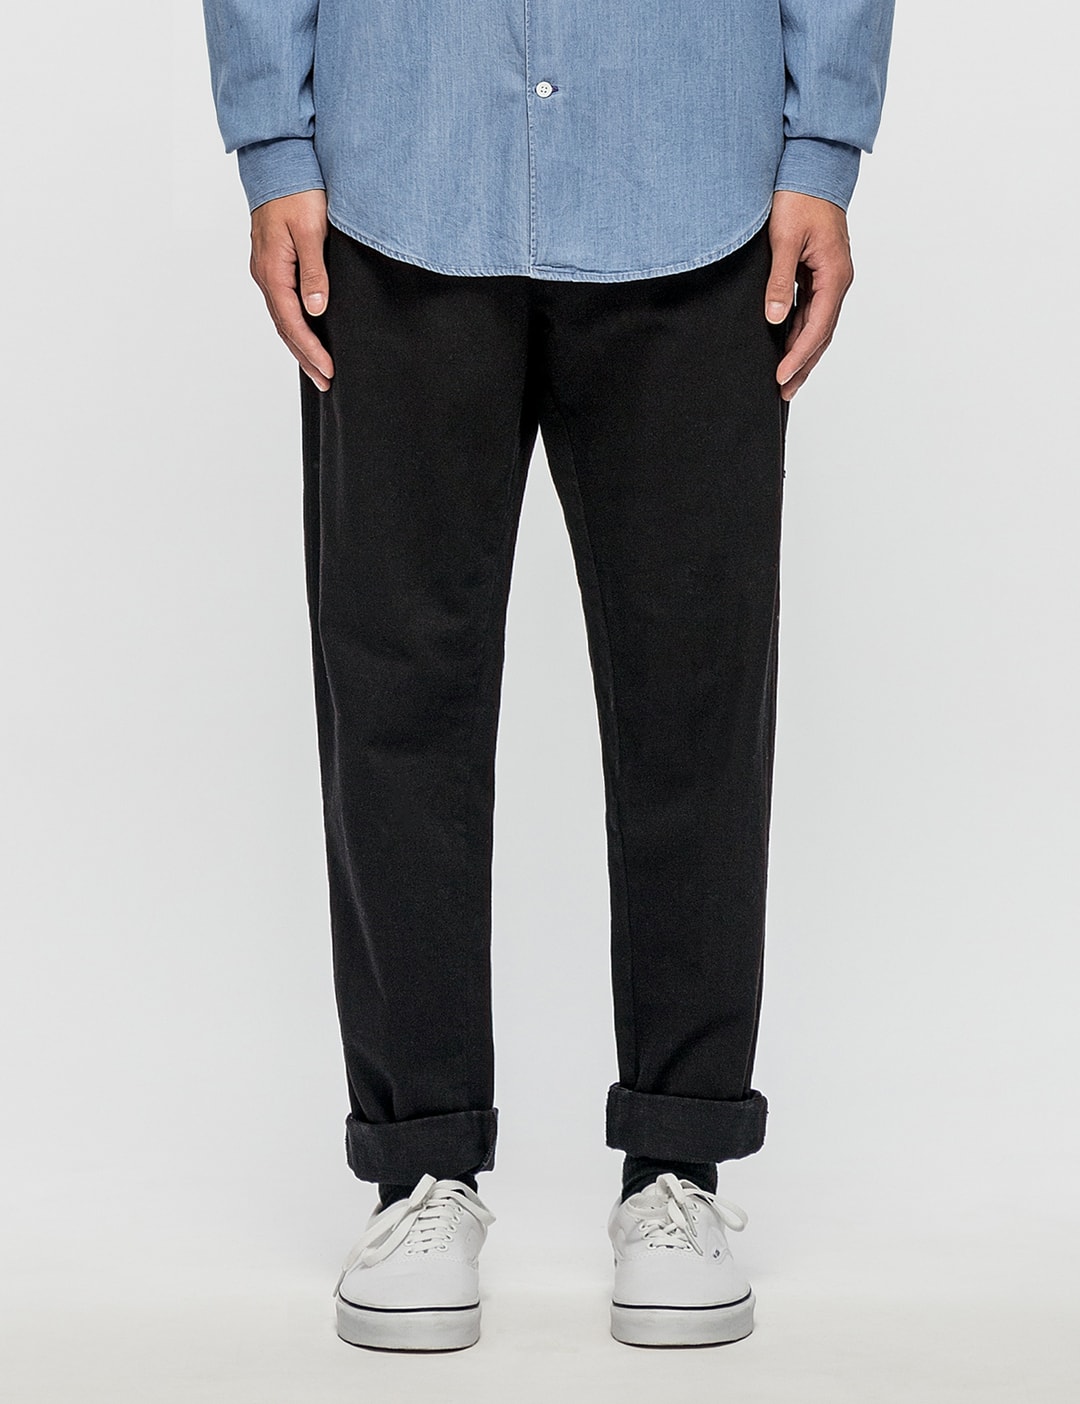 Études - Archives Pants | HBX - Globally Curated Fashion and Lifestyle ...